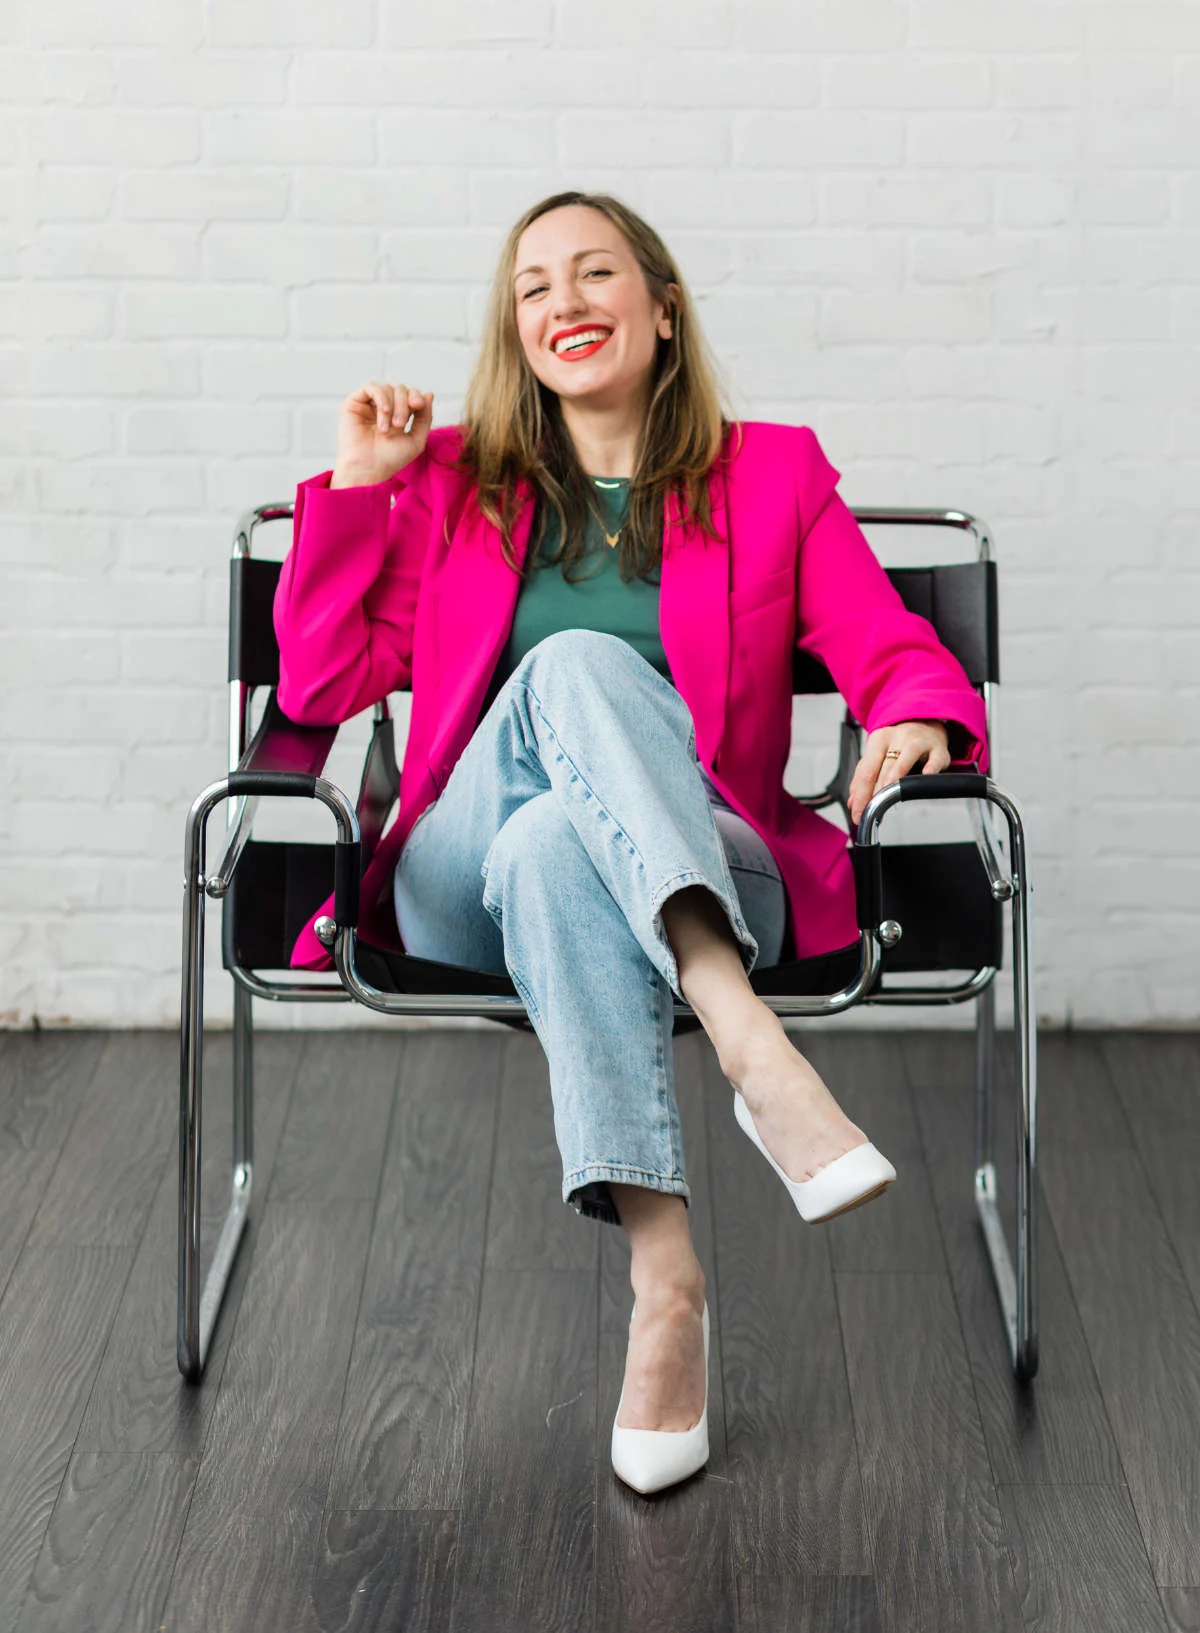 Photo of ShoeTease shoe blogger sitting in chair smiling, wearing a hot pink blazer green top faded jeans and white pumps.